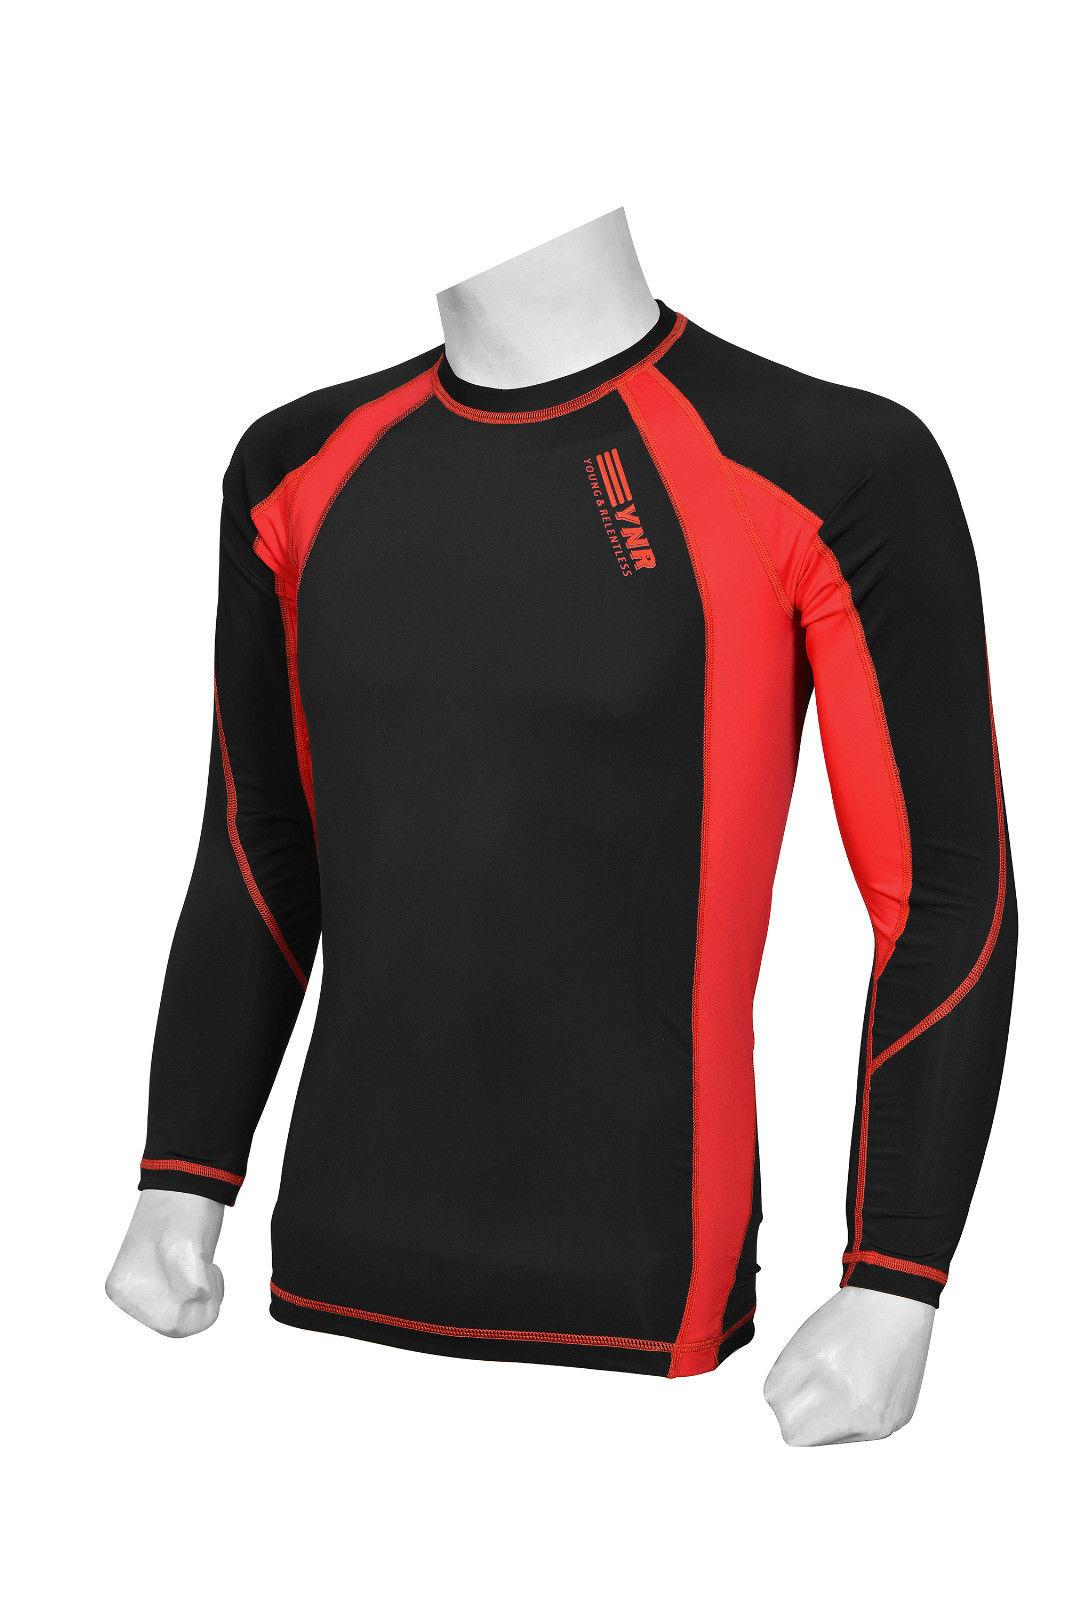 Men's Super Thermal Compression Armour Base Layer Cold Wear Top